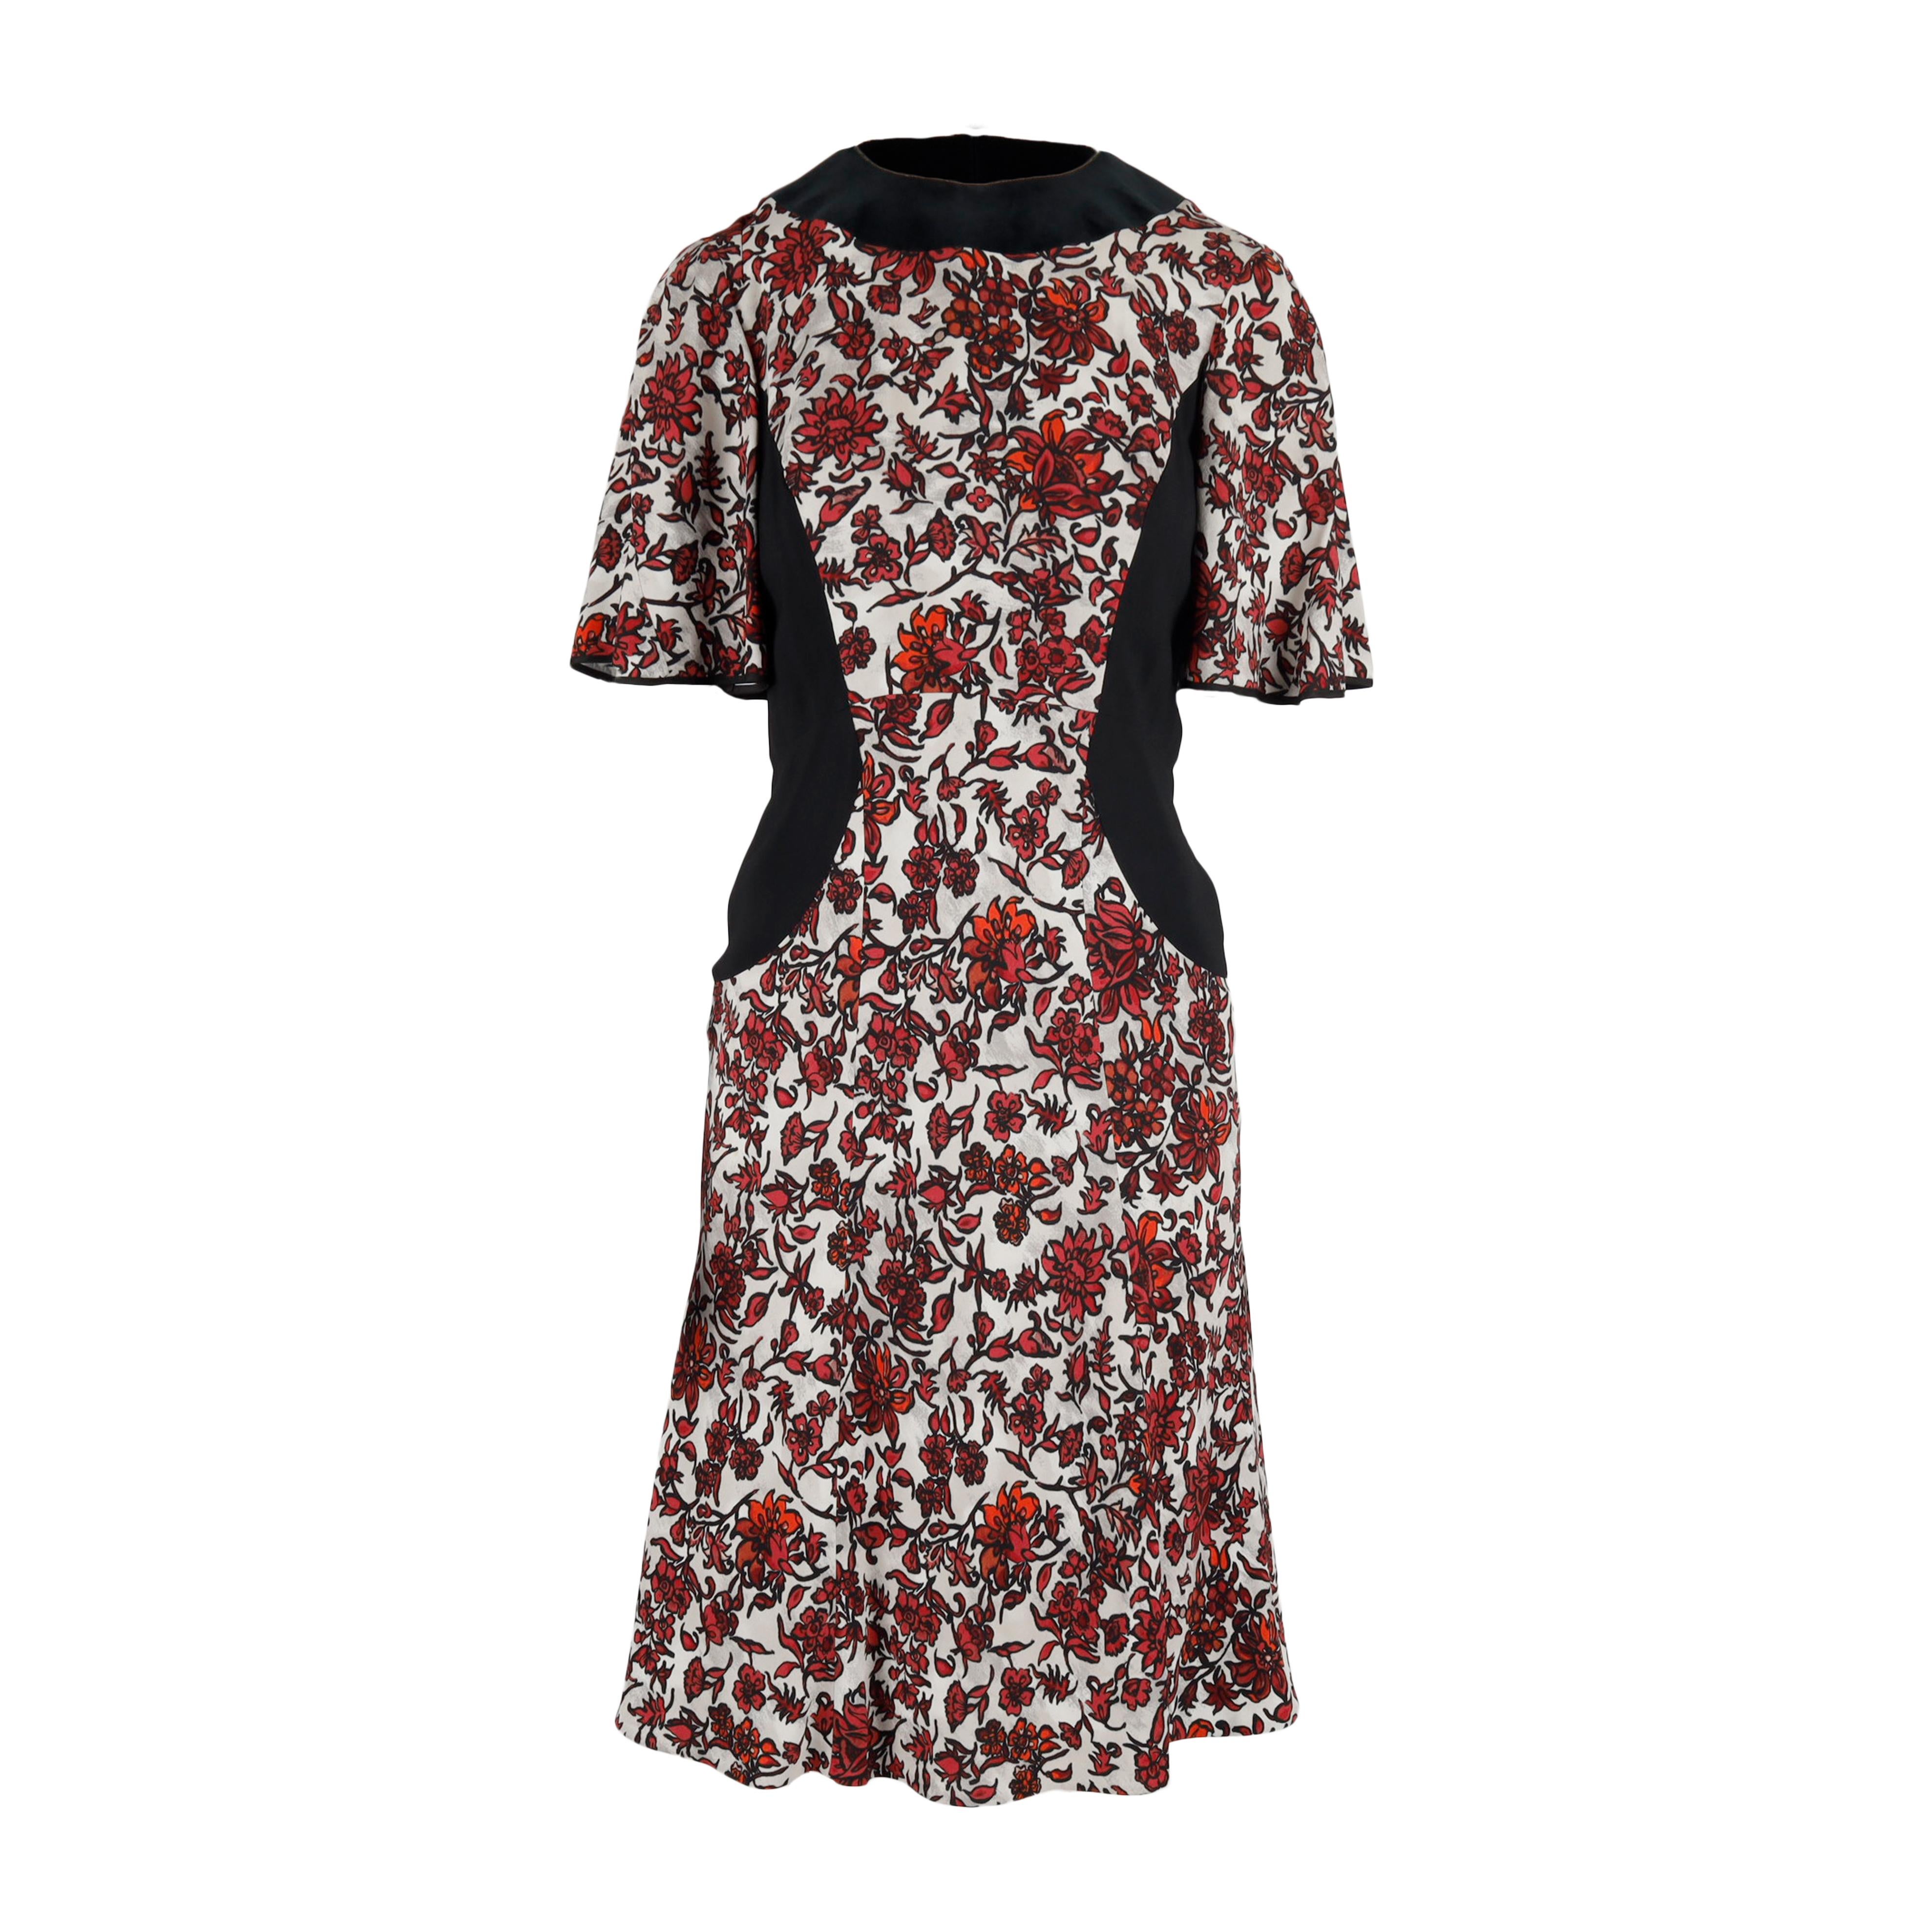 Louis Vuitton Red Black Floral Printed Dress For Sale 3